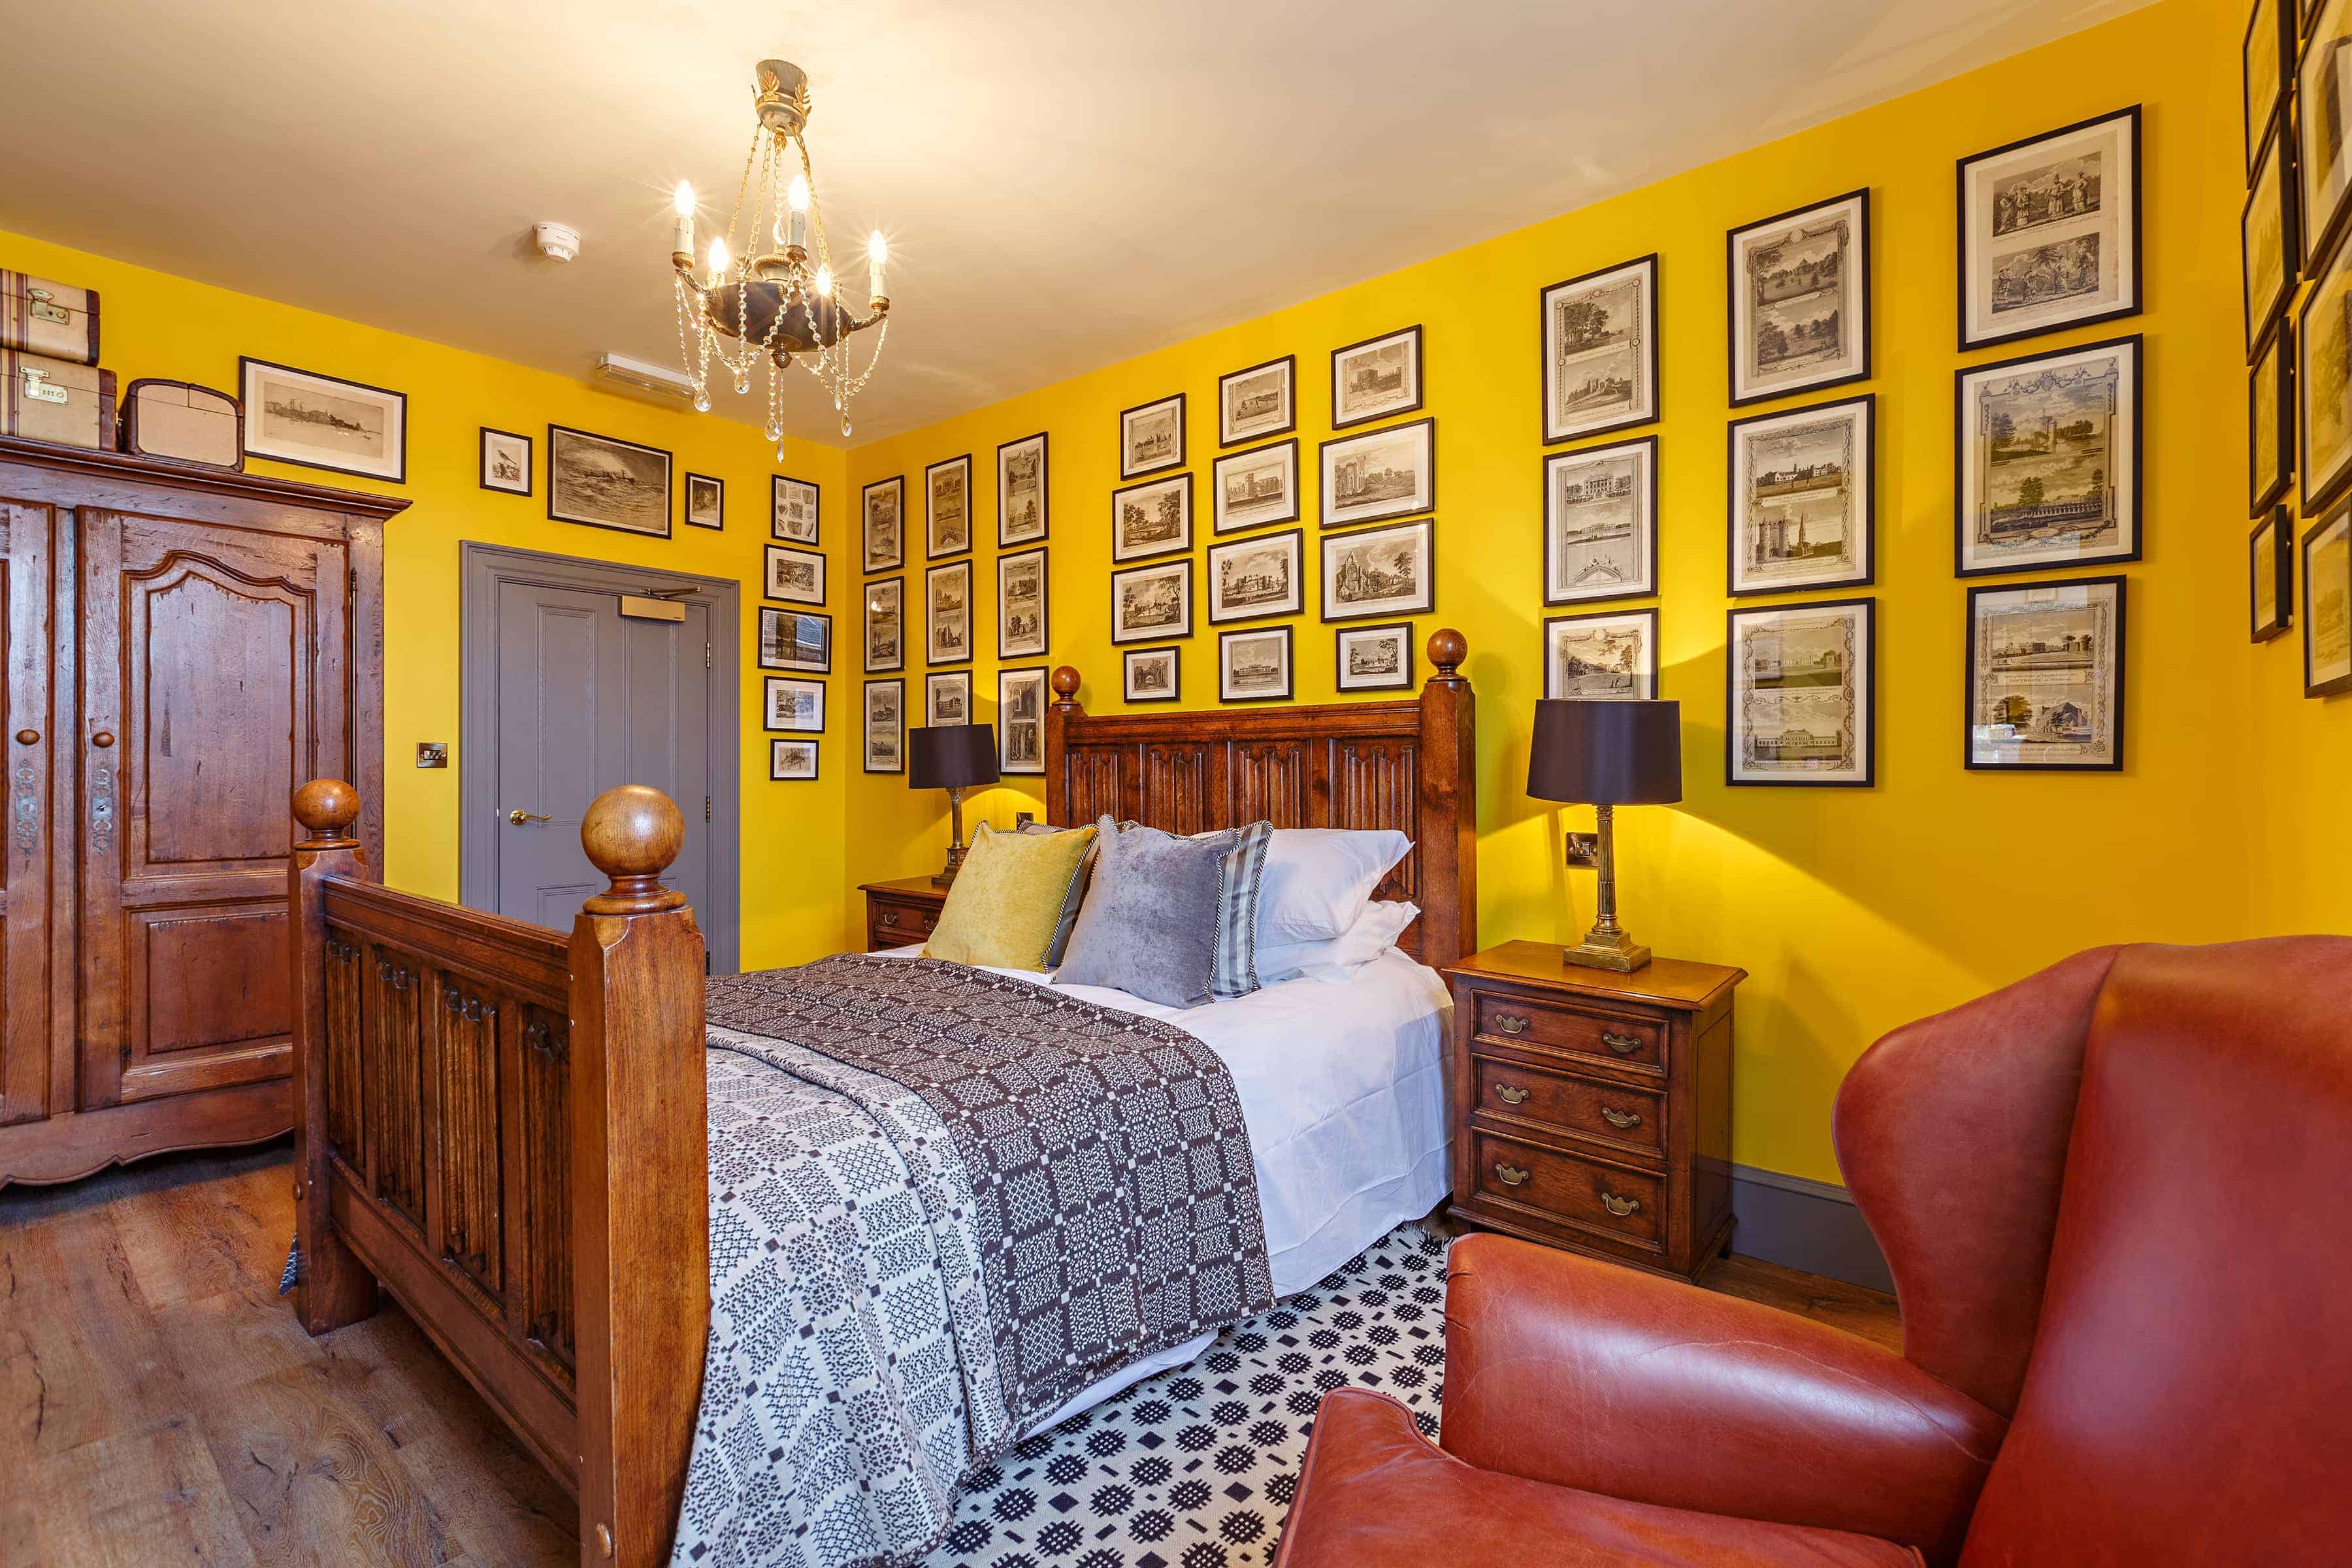 Take your pick from the eclectic rooms at The Dial House